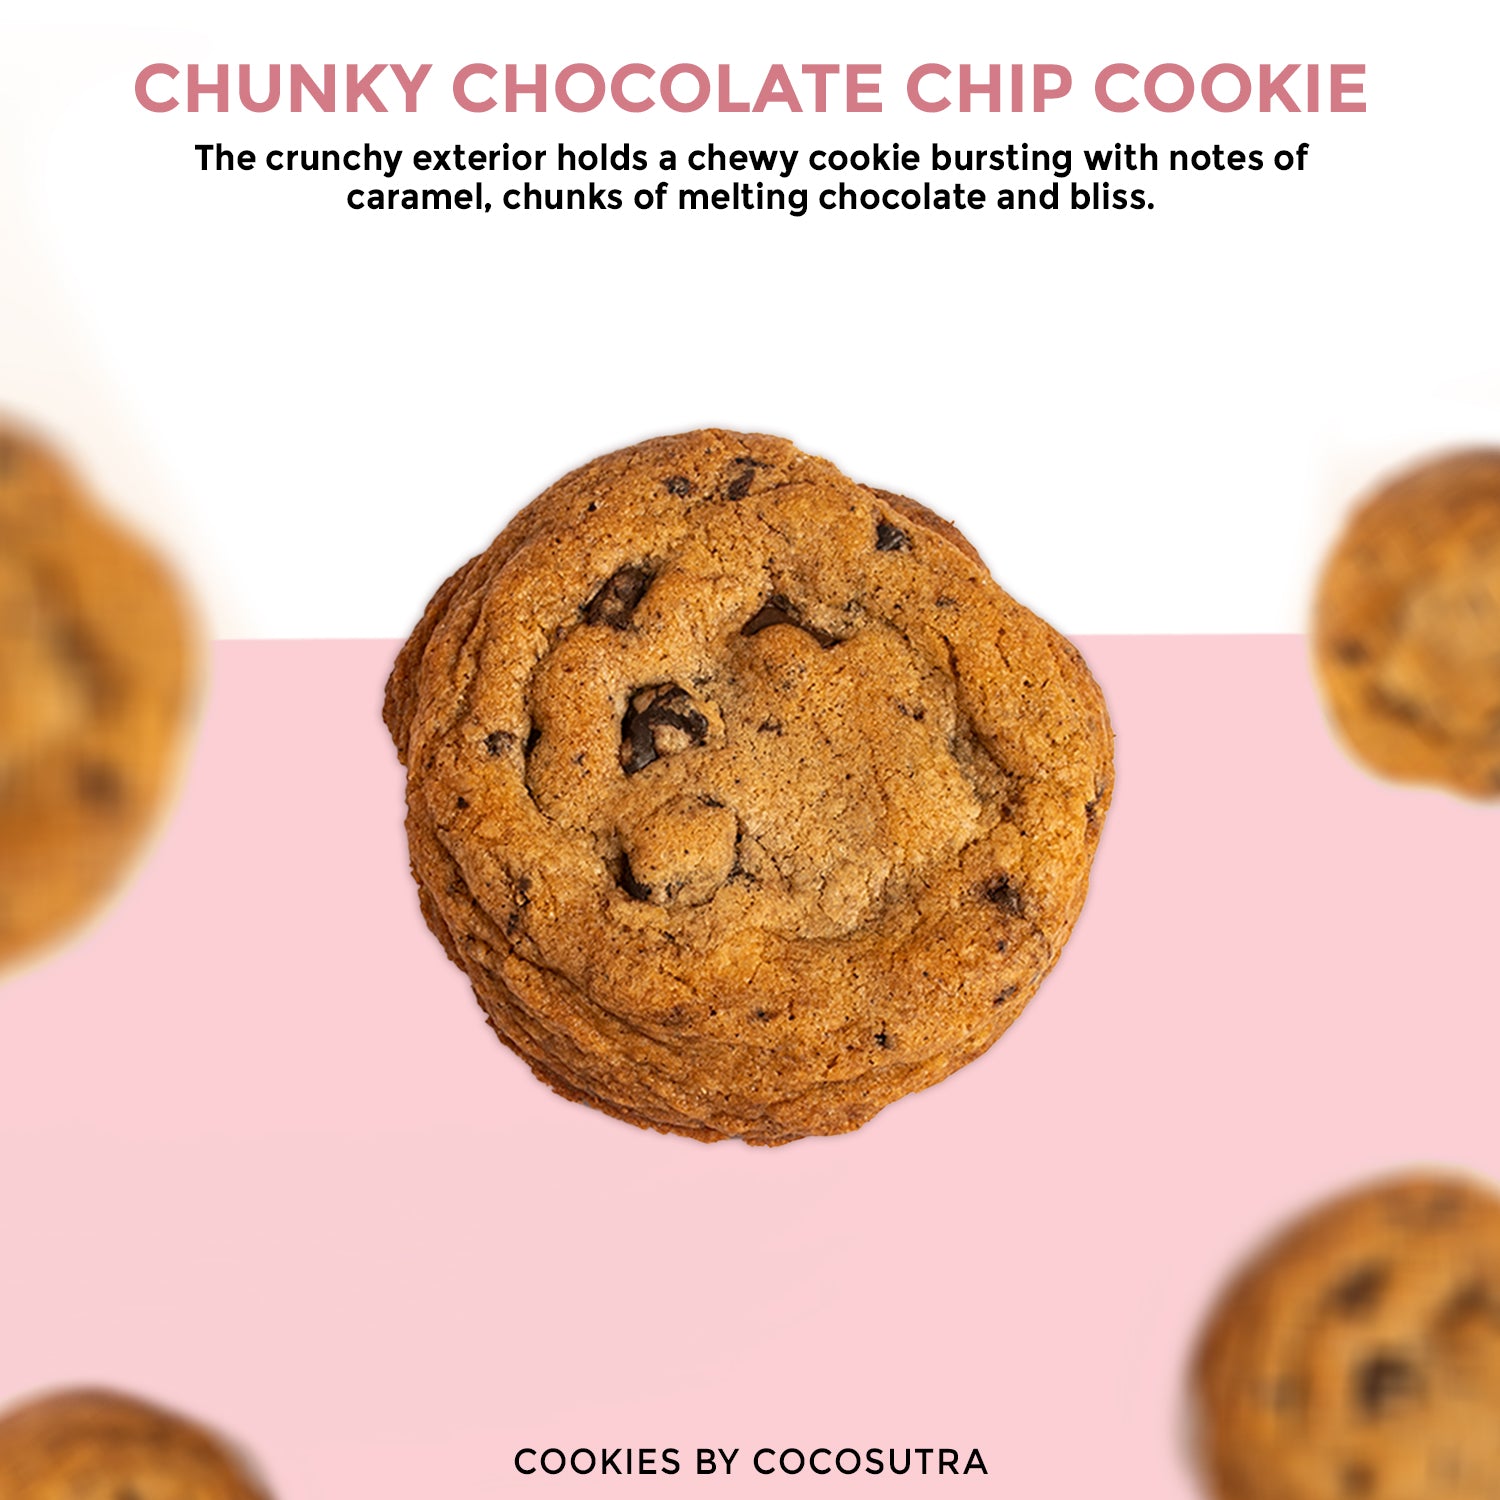 Cocosutra Chunky Chocolate Chip Cookies - Freshly Baked